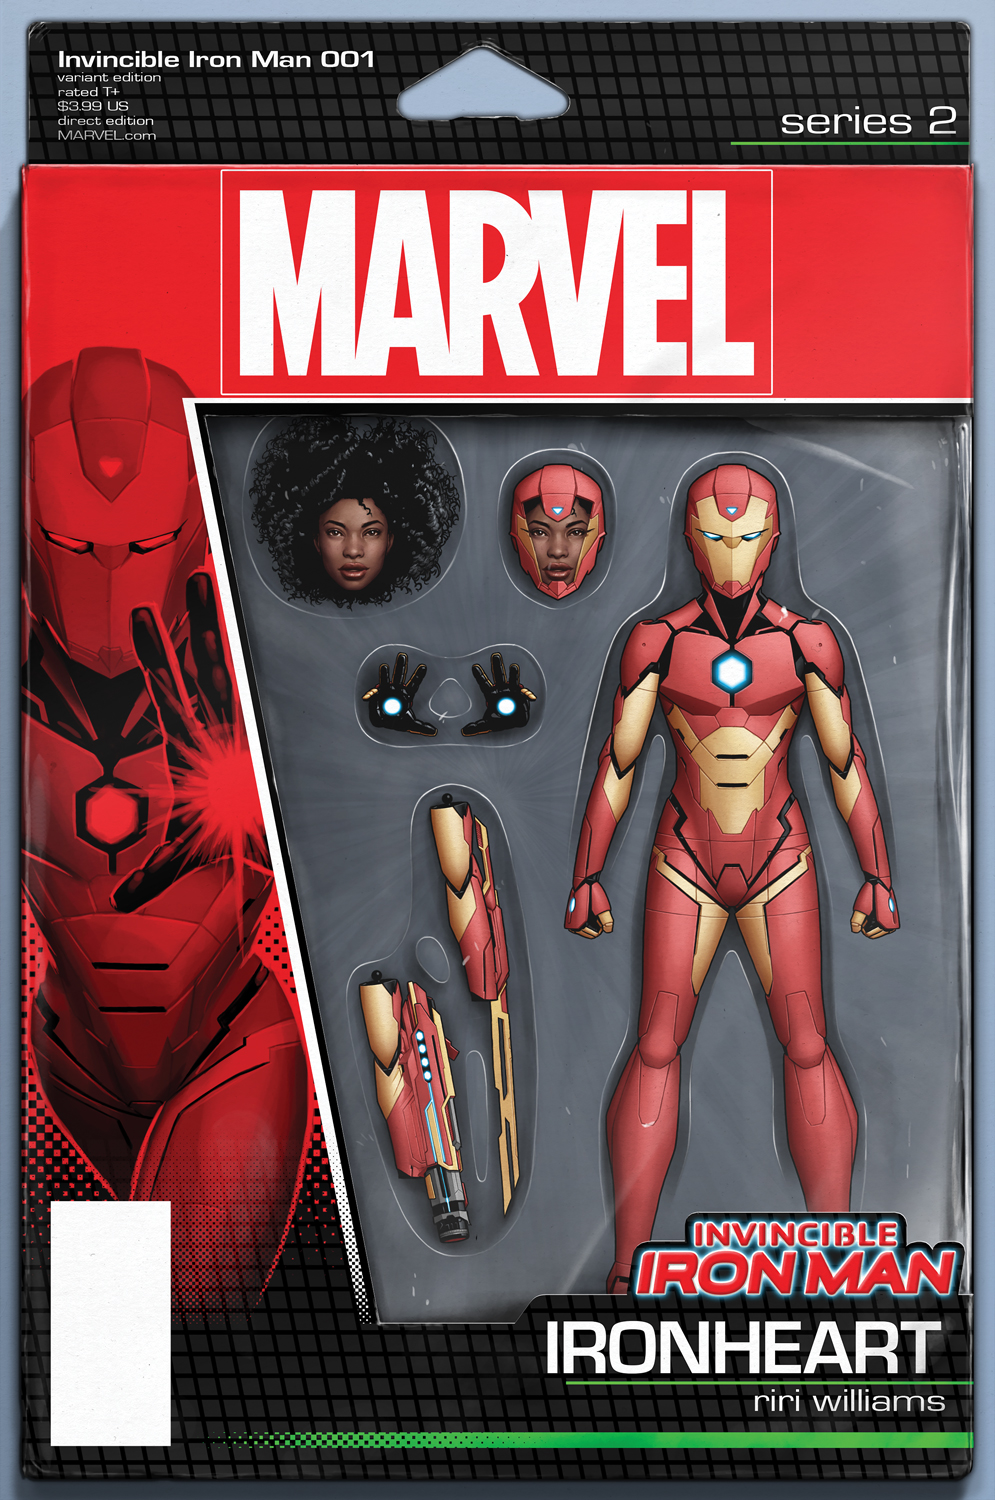 Collectibles Collectible Graphic Novels Tpbs Marvel Invincible Iron Man 1 Iron Heart Riri Williams Divided We Stand Variant Collectibles Collectible Comics